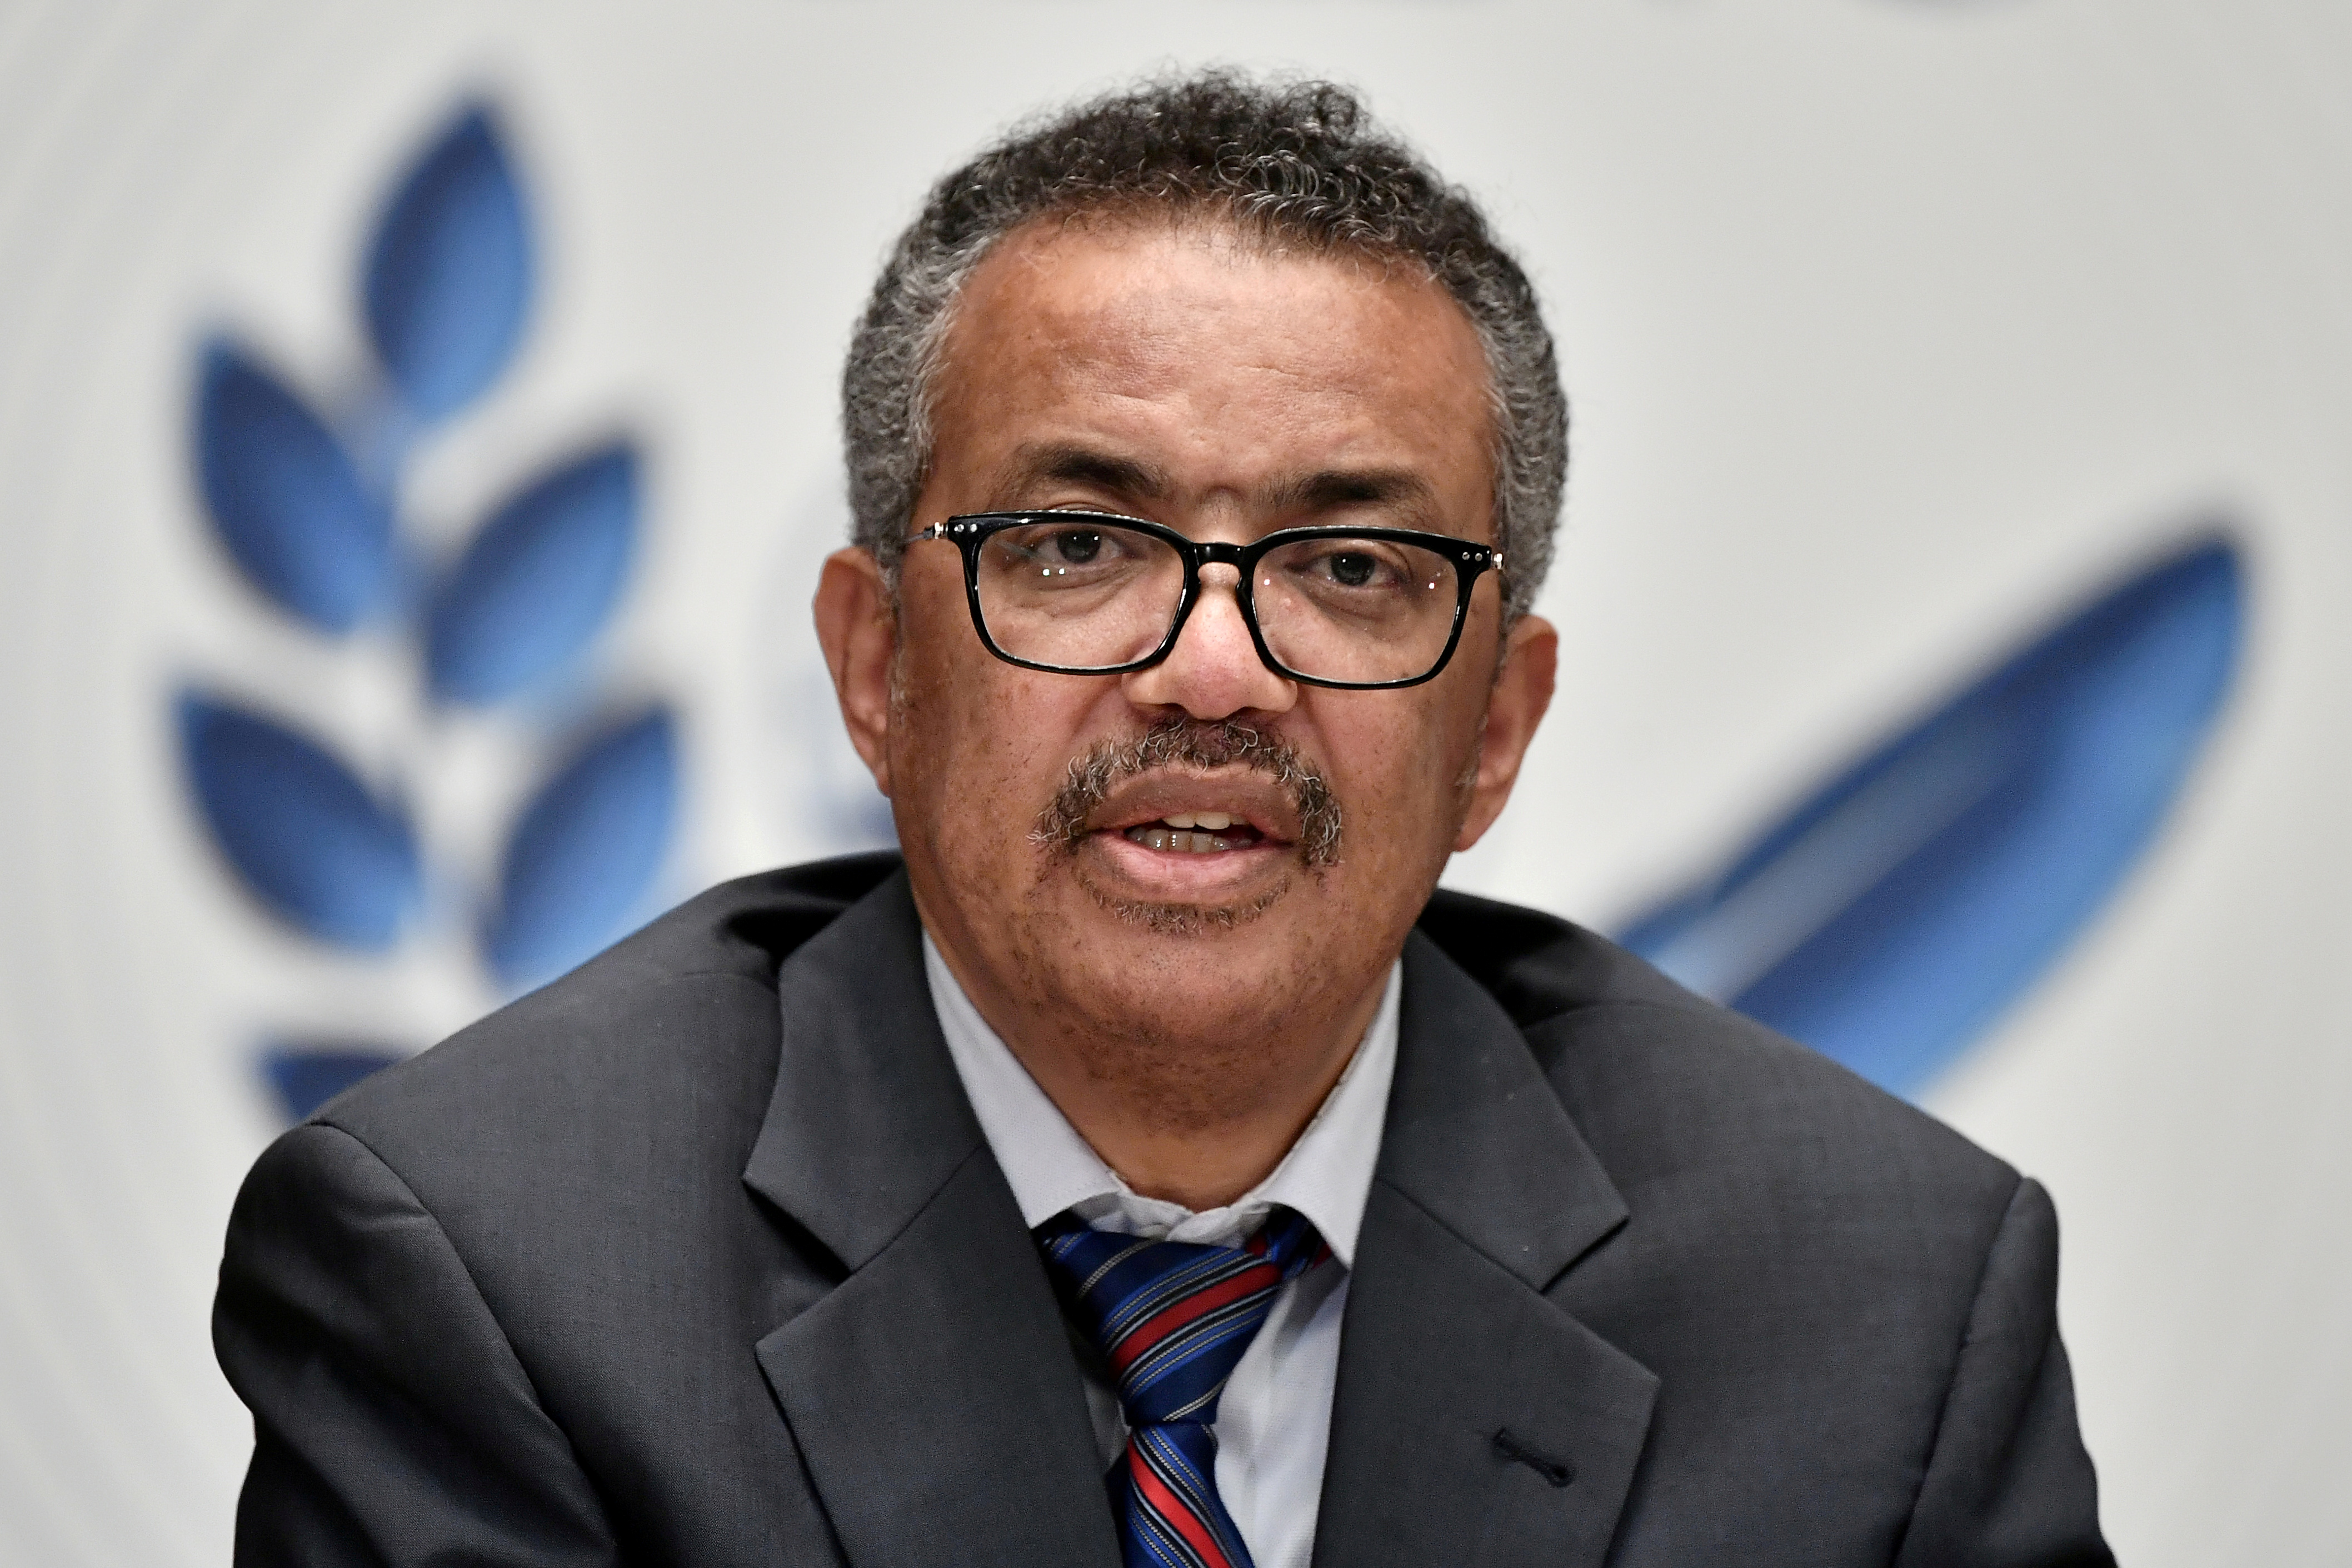 World Health Organization (WHO) Director-General Tedros Adhanom Ghebreyesus attends a news conference organized by Geneva Association of United Nations Correspondents (ACANU) amid the COVID-19 outbreak, caused by the novel coronavirus, at the WHO headquarters in Geneva Switzerland July 3, 2020. Fabrice Coffrini/Pool via REUTERS/File Photo